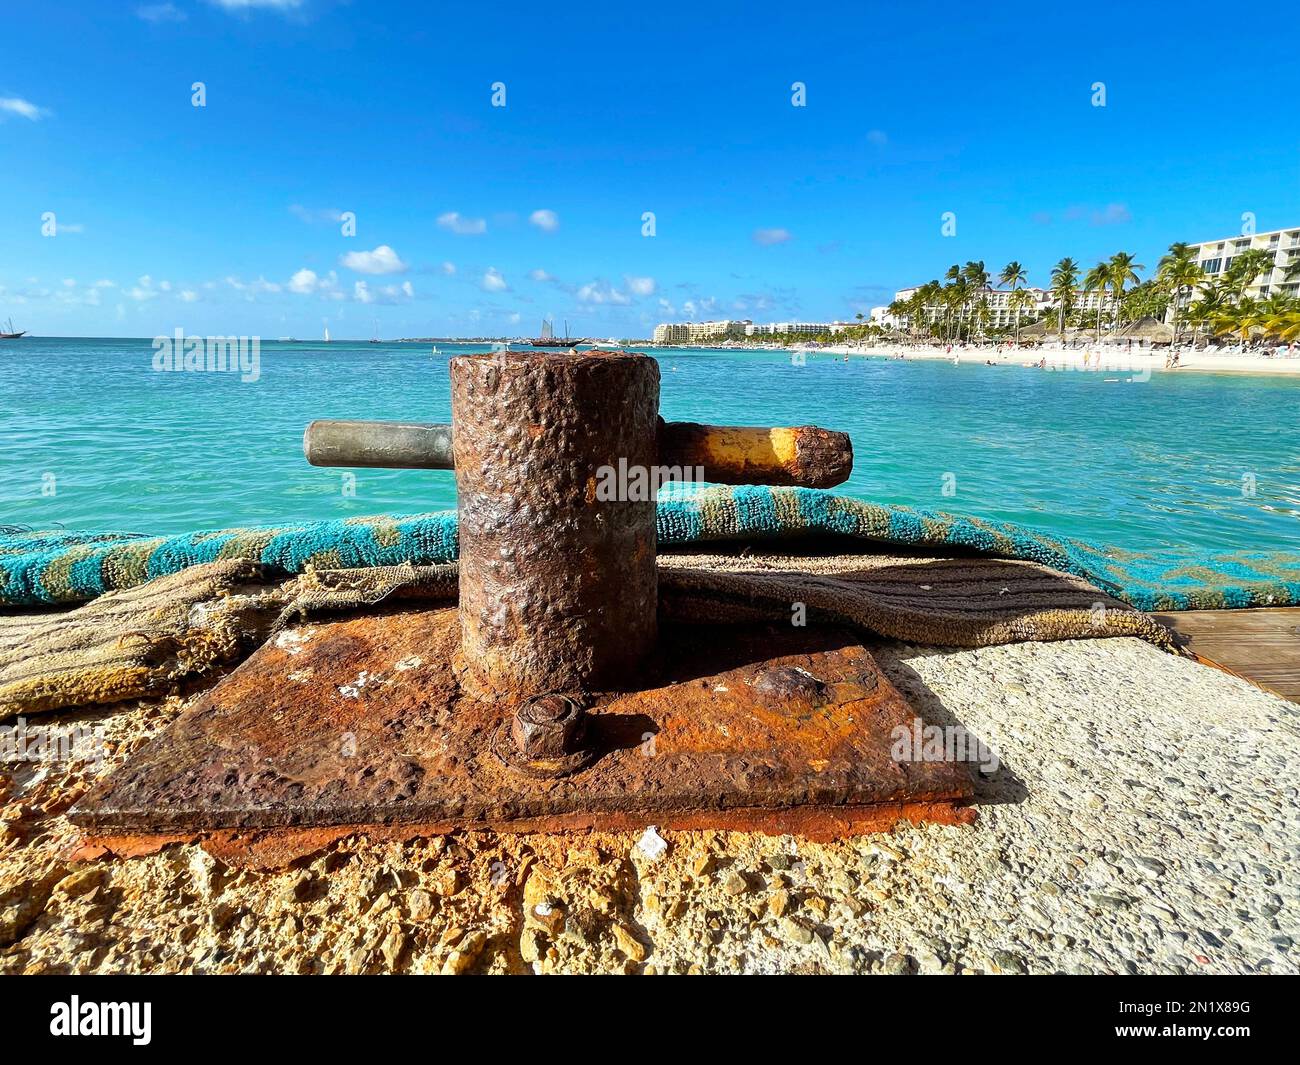 Close up of an old, rusted bitt bollard on a pier in Aruba. Tha Caribbean sea and Palm Beach in the background. Stock Photo